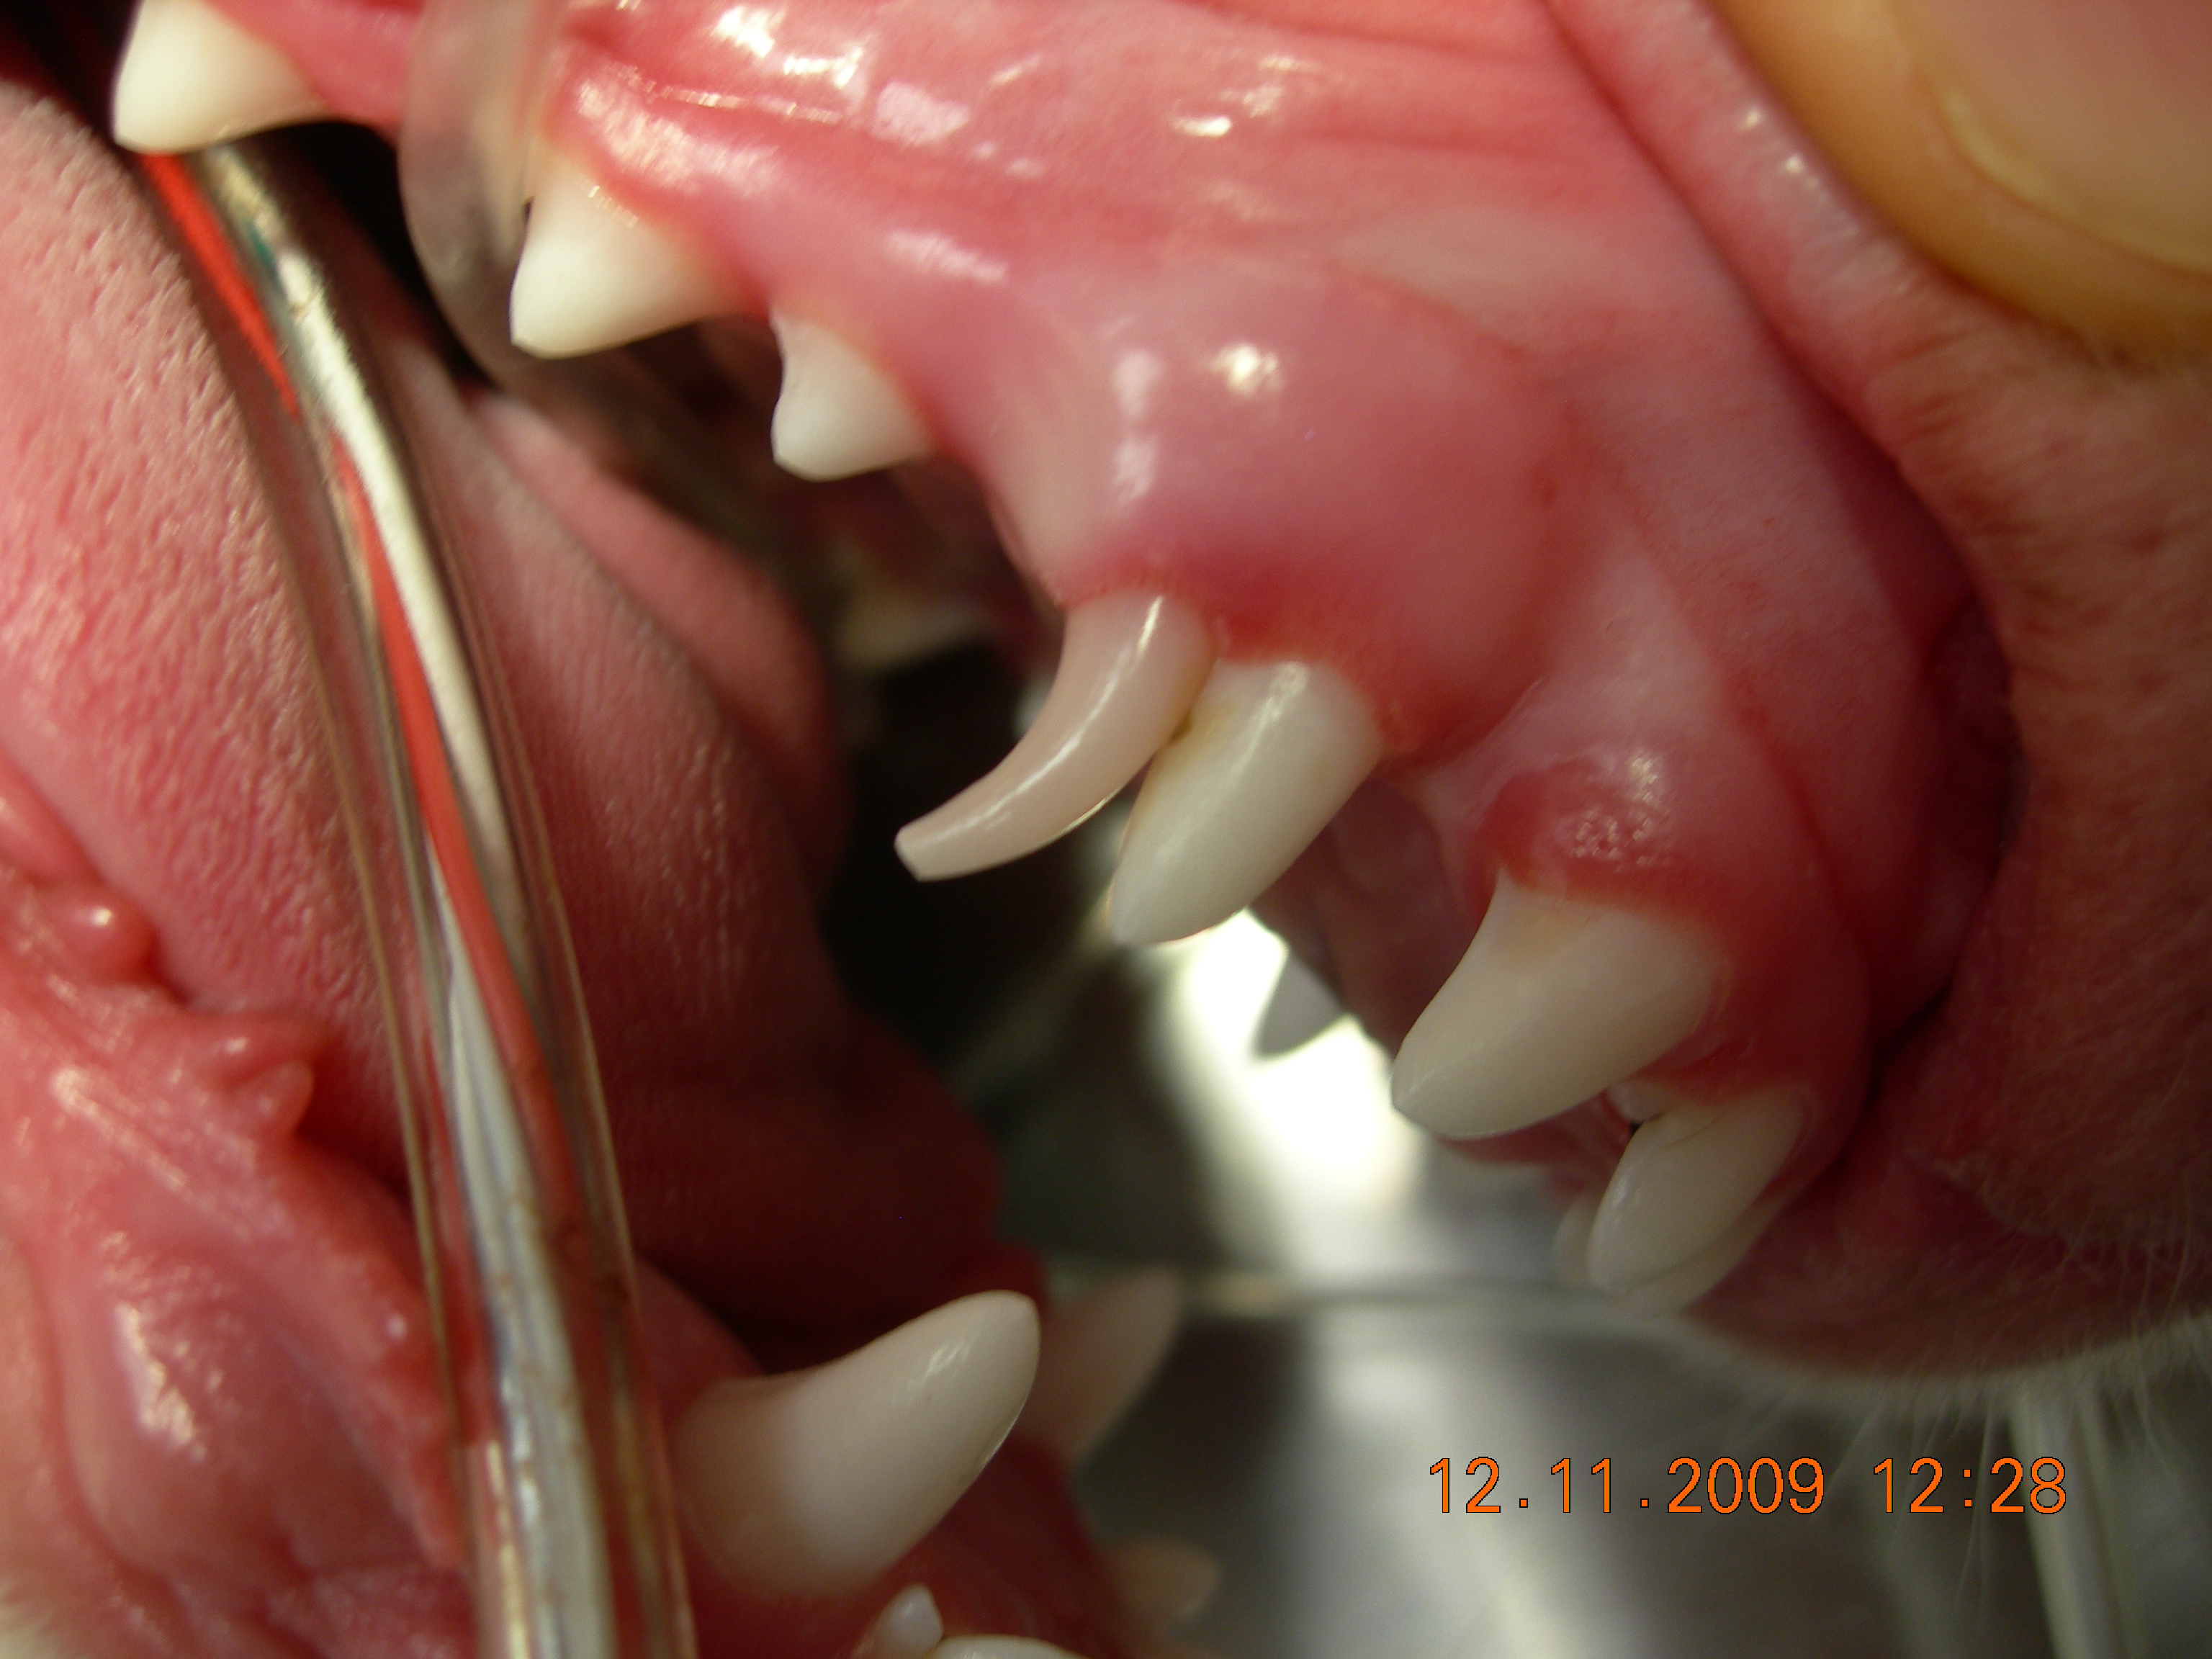 Baby tooth behind adult. Before extraction. Note wear on tip of baby tooth